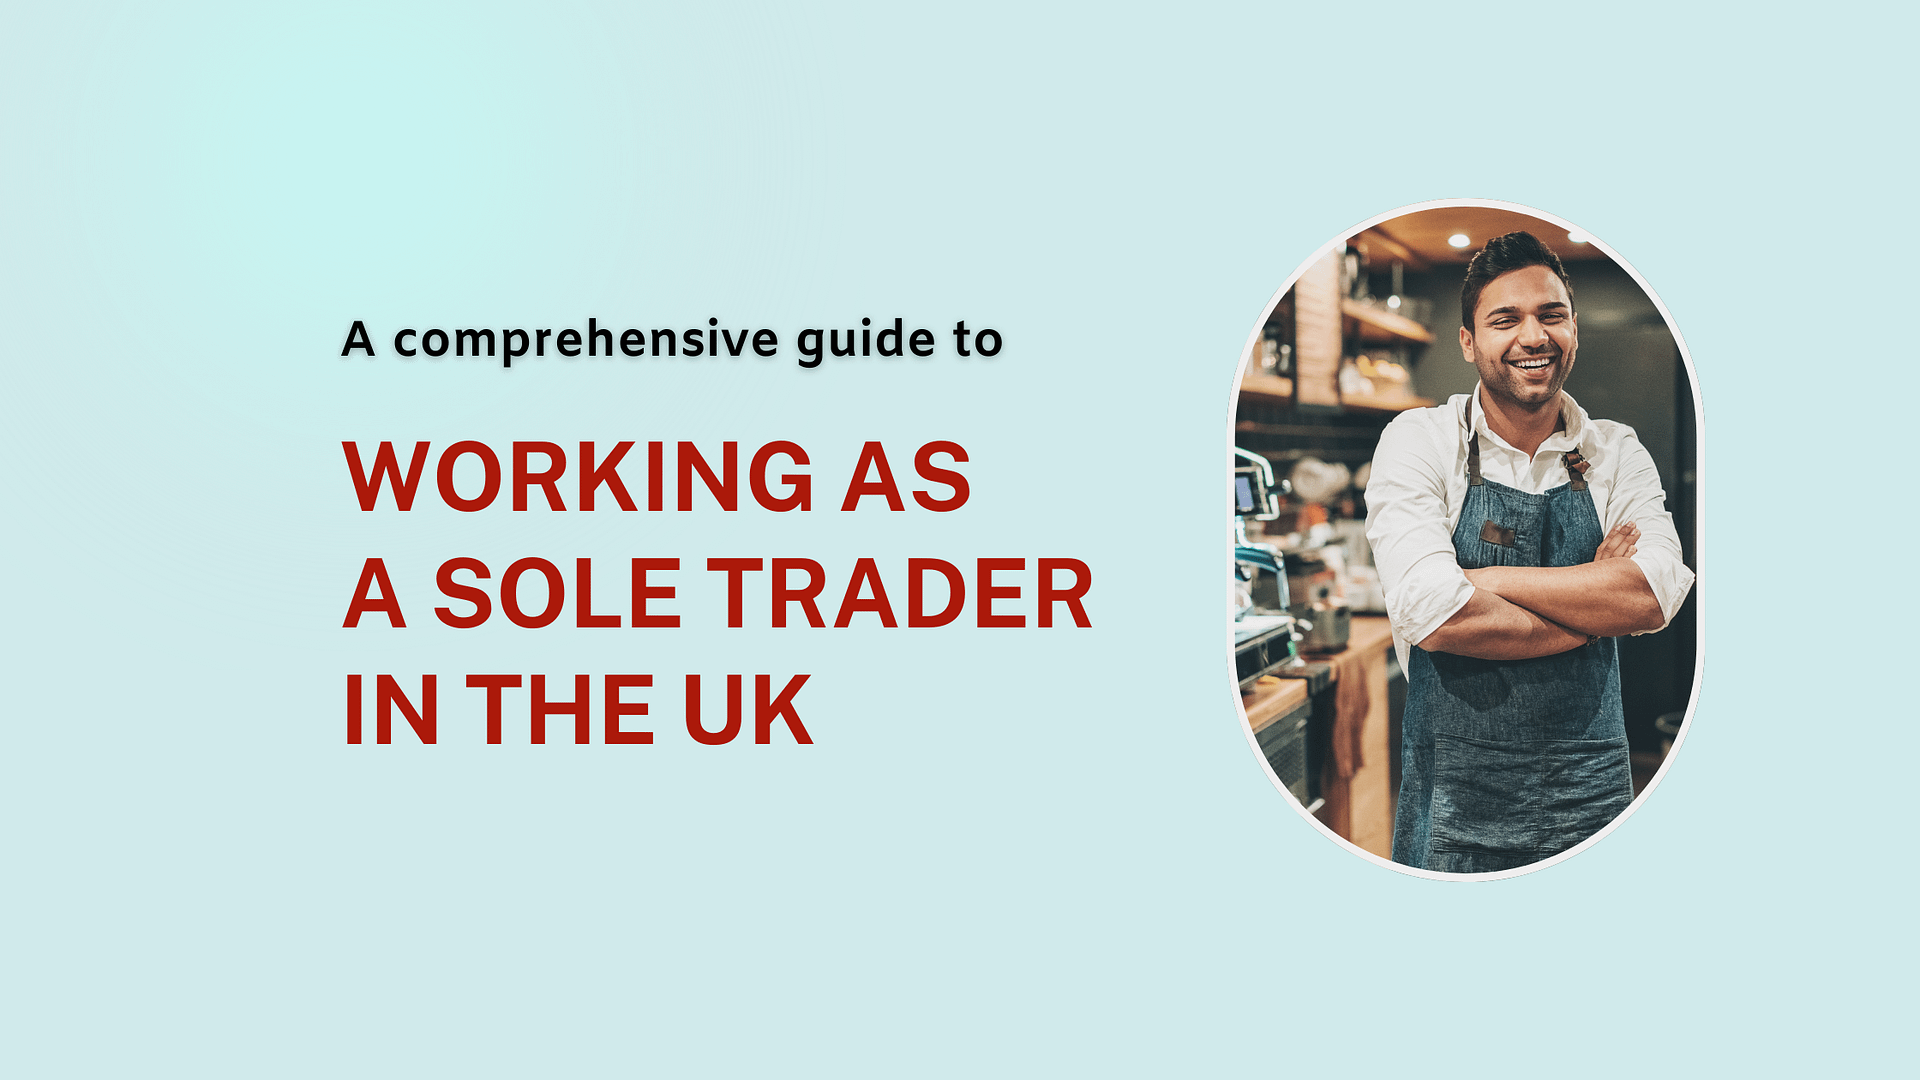 Working as a Sole Trader in the UK